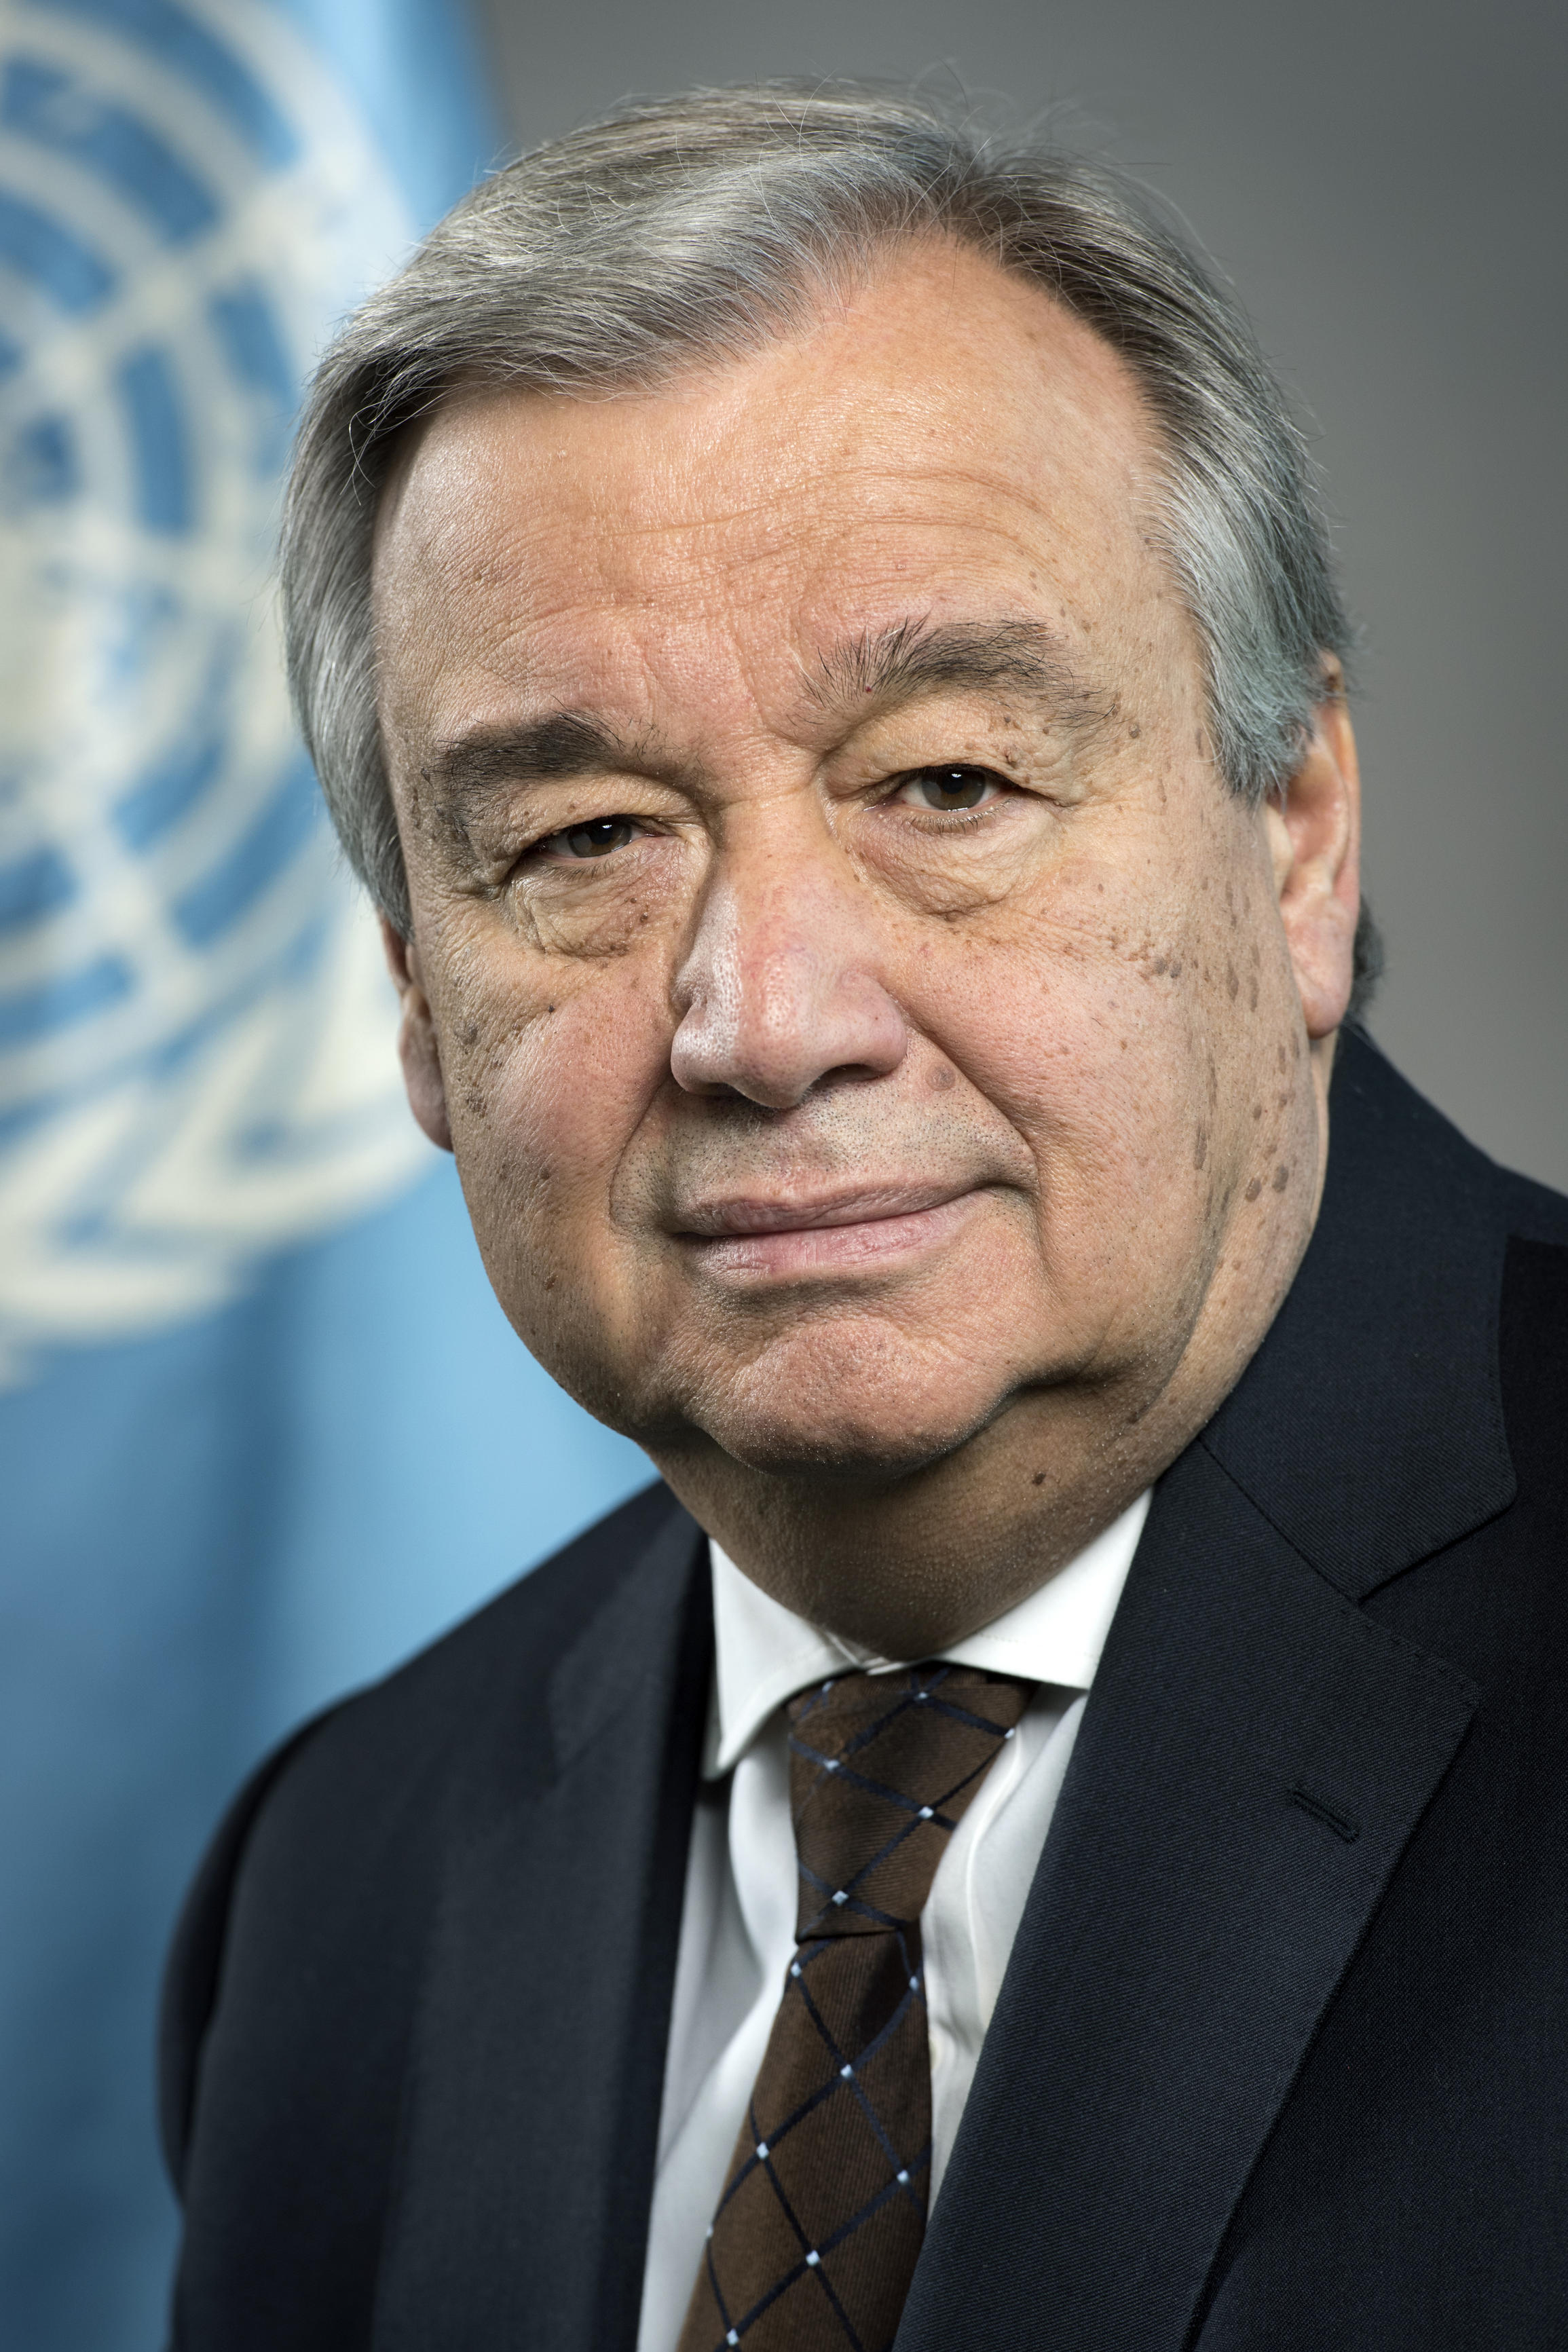 Antonio Guterres ‘appeals for peace’ and takes the office